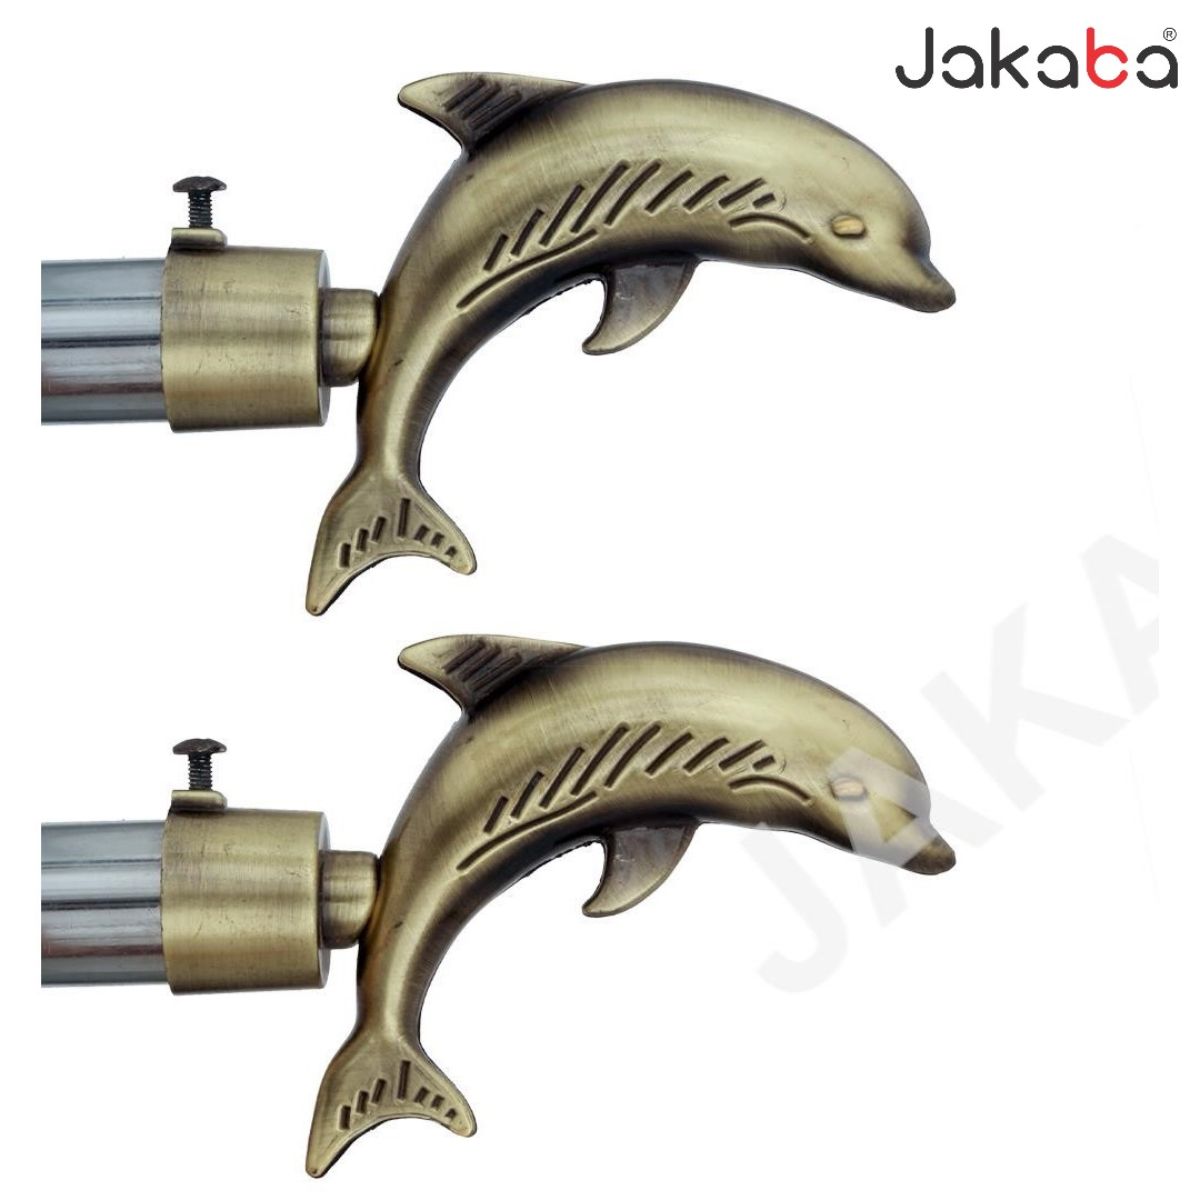 JAKABA Antique Brass Curtain Finials (Without Supports) - Pack Of 2 Pcs (1  Pair) : Curtain Brackets Set/Holders - JKBATQ920-01-WOS : Jakaba : Online  Hardware and Interior Store